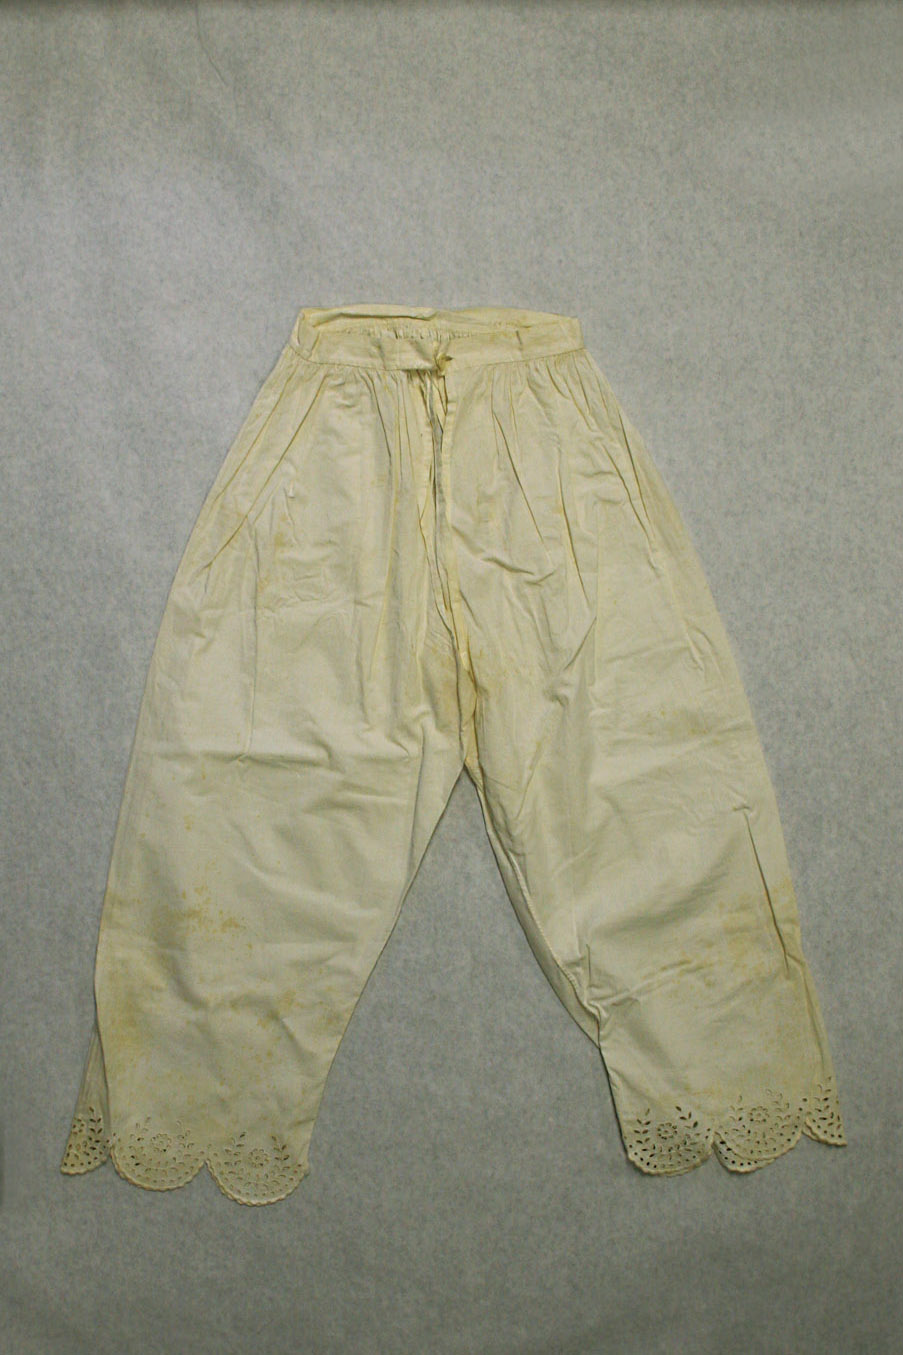 These pantaloons were likely worn beneath the dress Katharine Wright wore to the White House in 1909. Photograph: International Women's Air & Space Museum, Cleveland, OH.